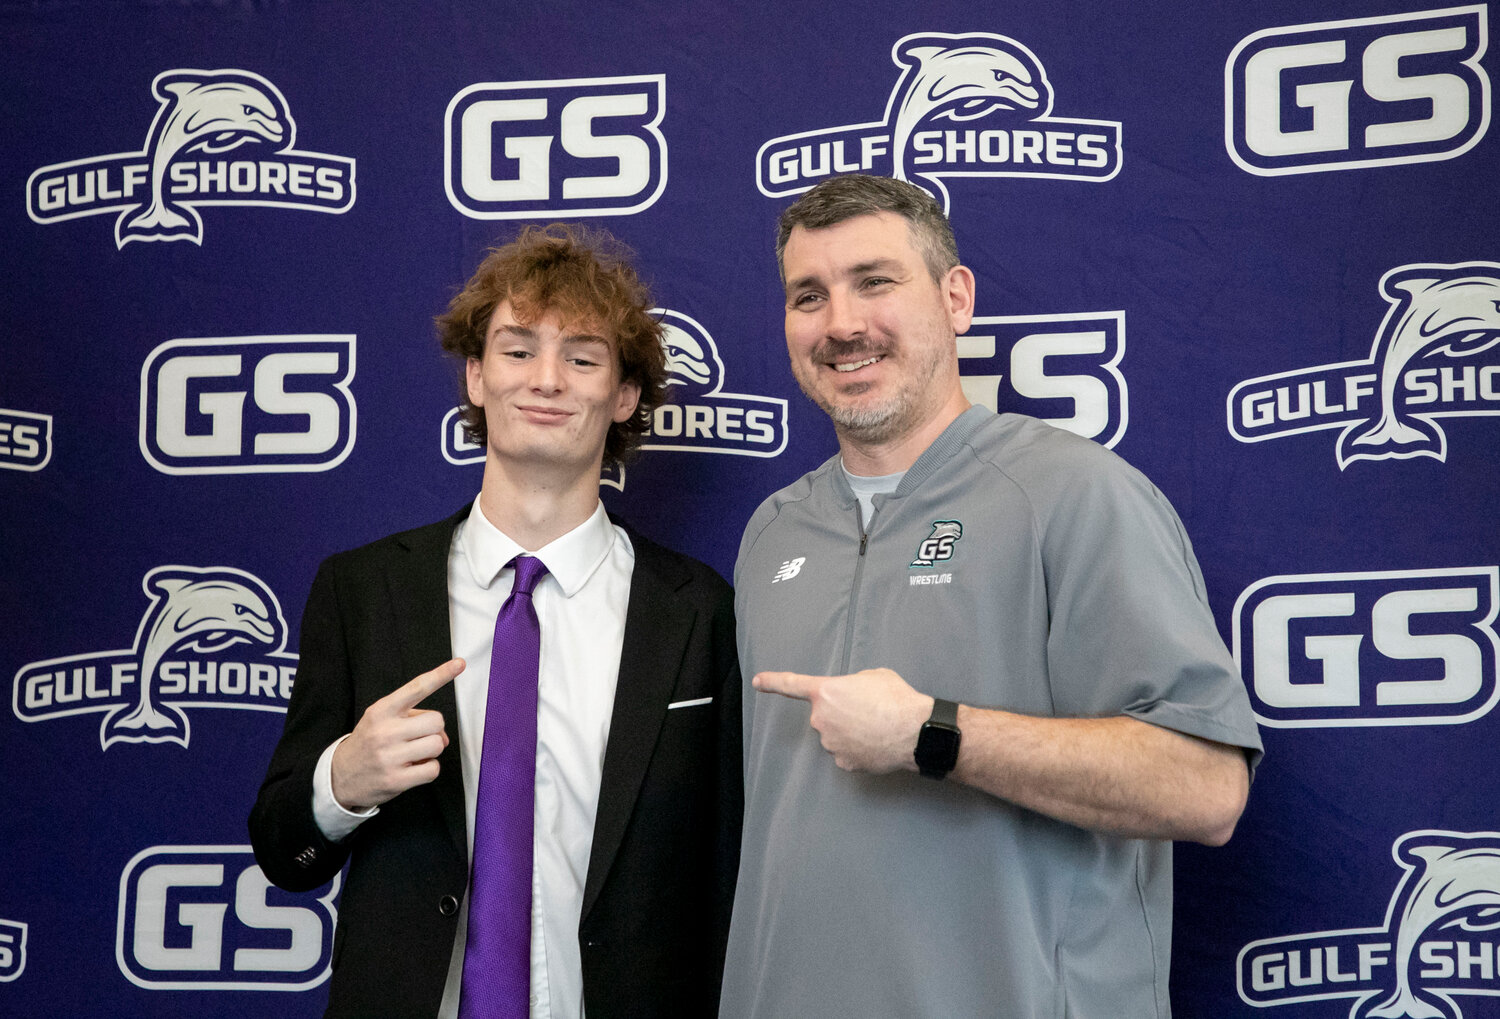 Dolphin senior Ethan Sharkey poses with Gulf Shores head wrestling coach Britt Shaw during Wednesday’s signing ceremony at the high school. Shaw said he was triple-happy as Sharkey’s wrestling coach, former cross country coach and friend of the family.